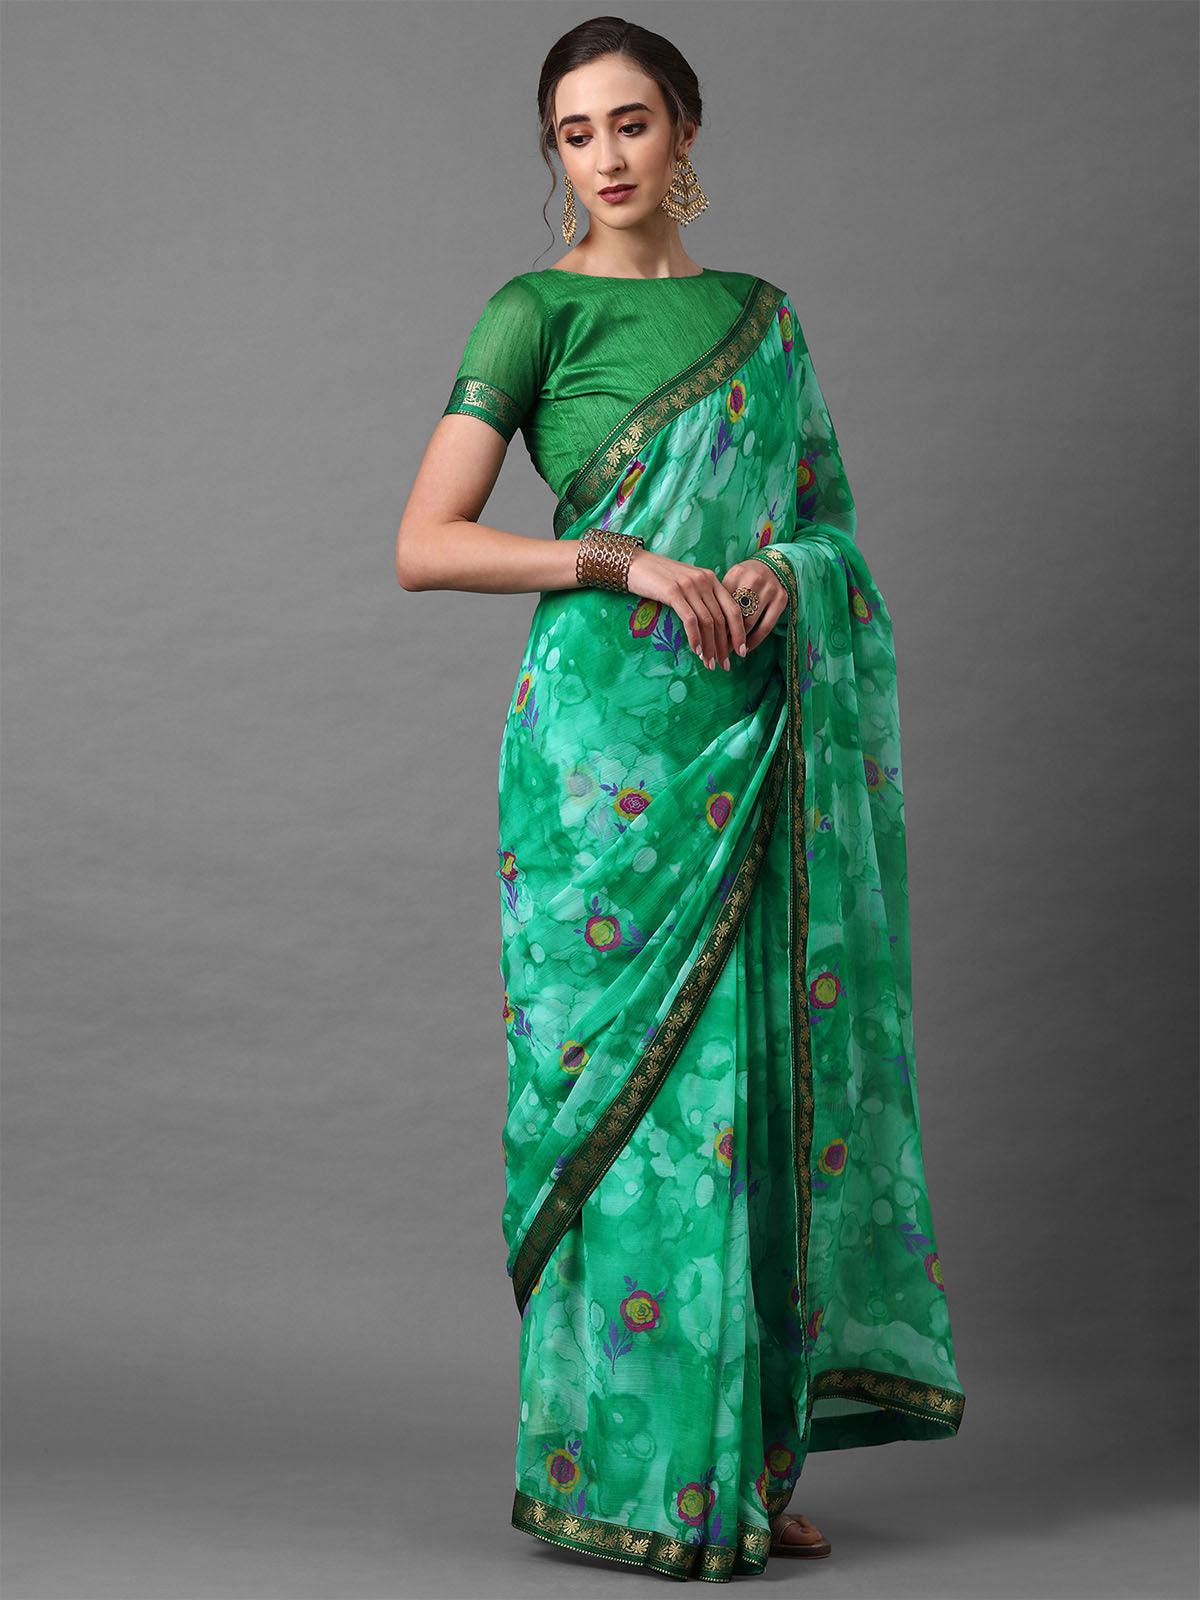 Women's Teal Green Casual Chiffon Printed Saree With Unstitched Blouse - Odette